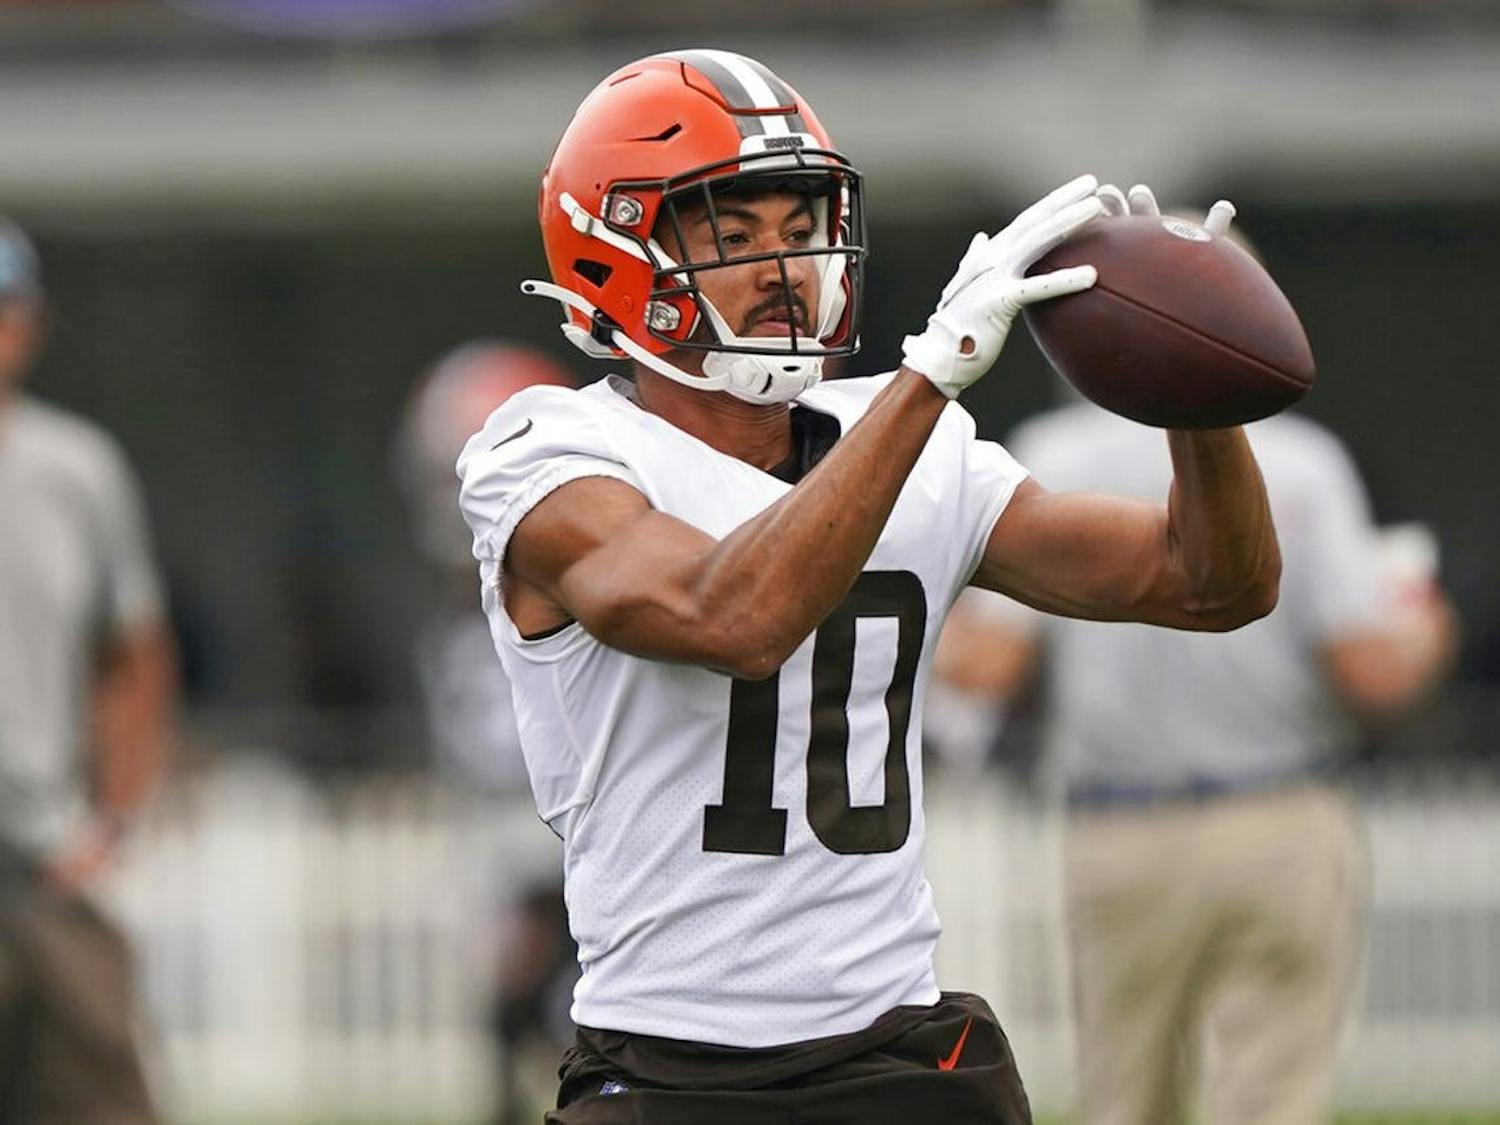 Cleveland Browns wide receiver Anthony Schwartz catches a pass at practice on Tuesday, Aug. 17, 2021, in Berea, Ohio.AP Photo/Tony Dejak